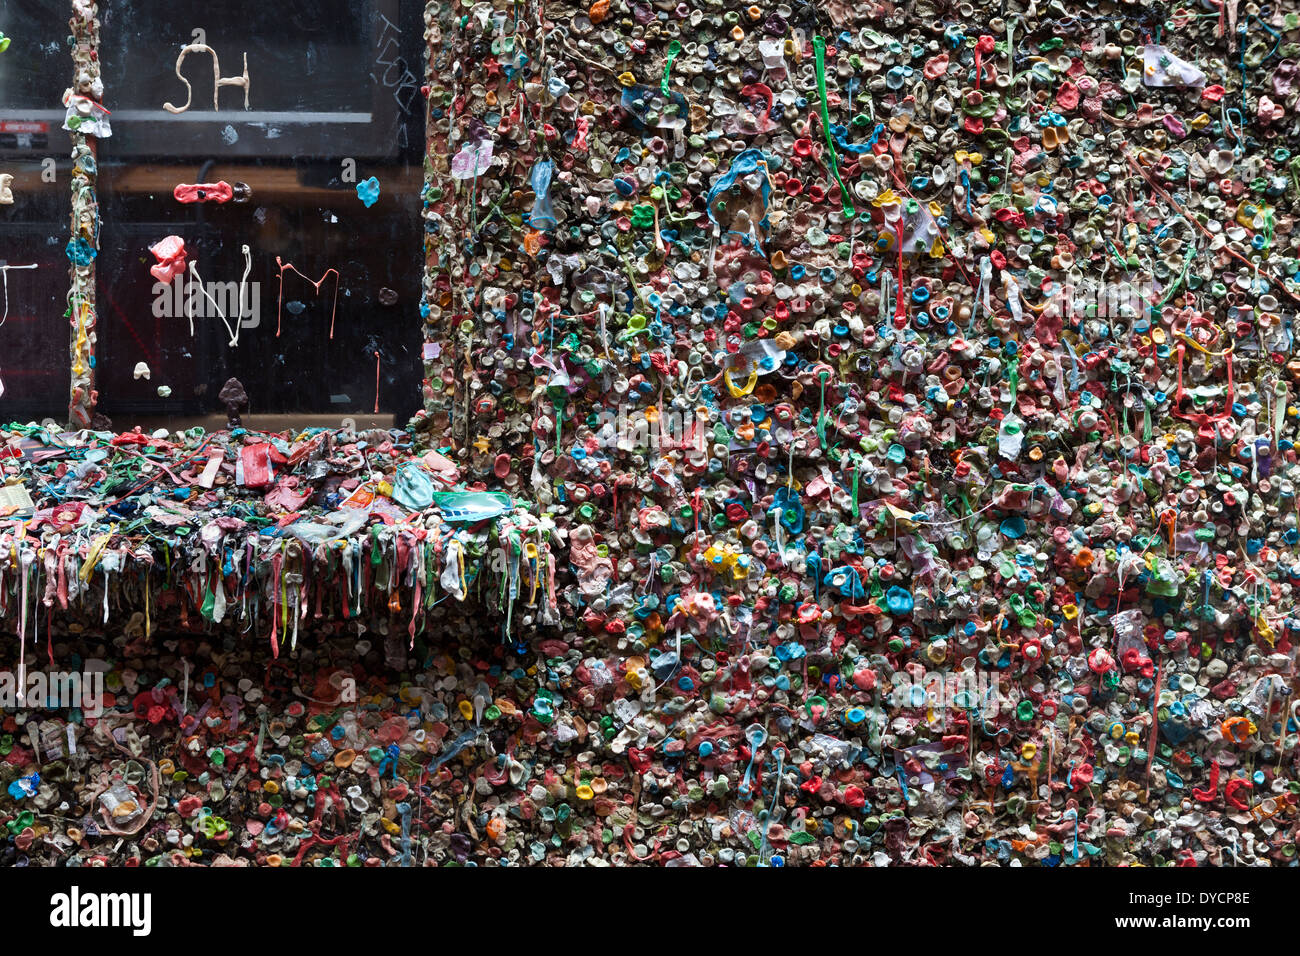 WA09570-00...WASHINGTON - The Gum Wall in Post Alley of Seattle's Pike Place Market. Stock Photo